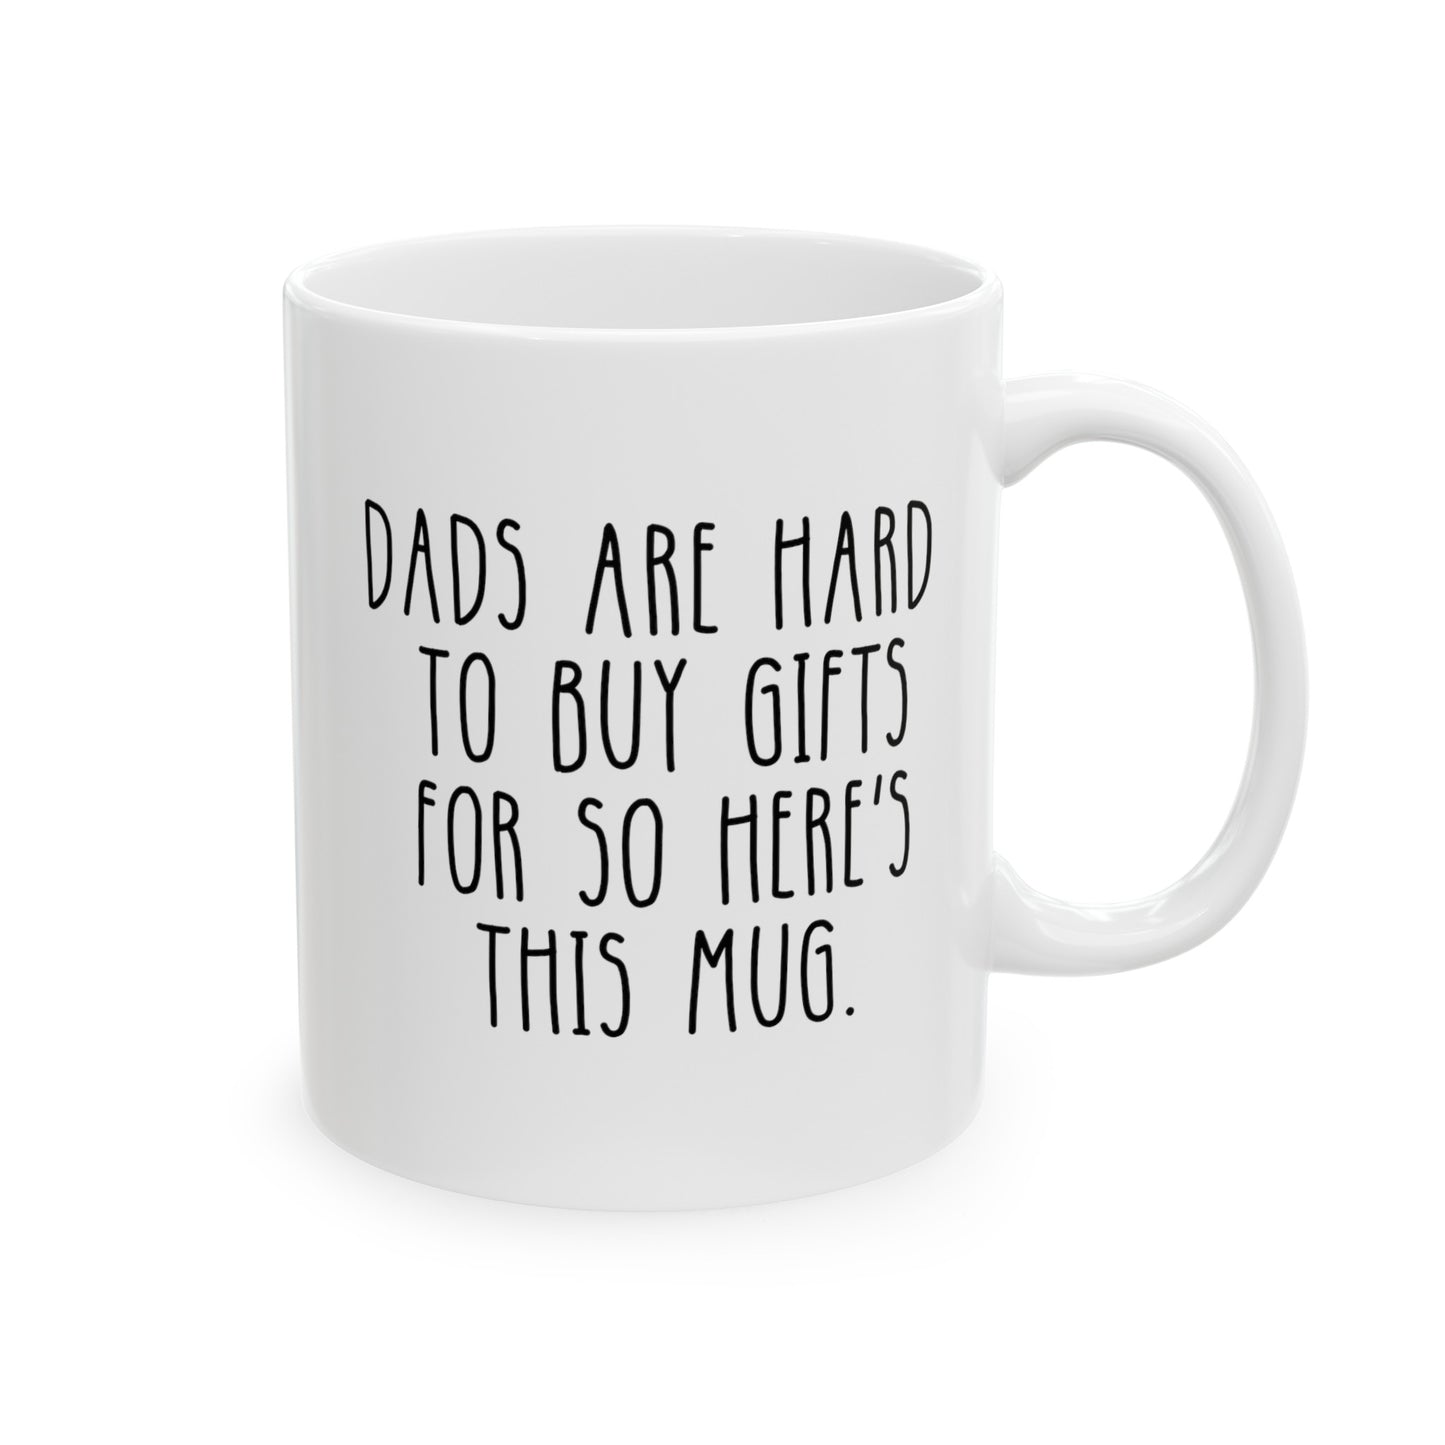 Dads Are Hard To Buy Gifts For So Here's This Mug 11oz white funny large coffee mug gift for father's day dad stepdad cute waveywares wavey wares wavywares wavy wares